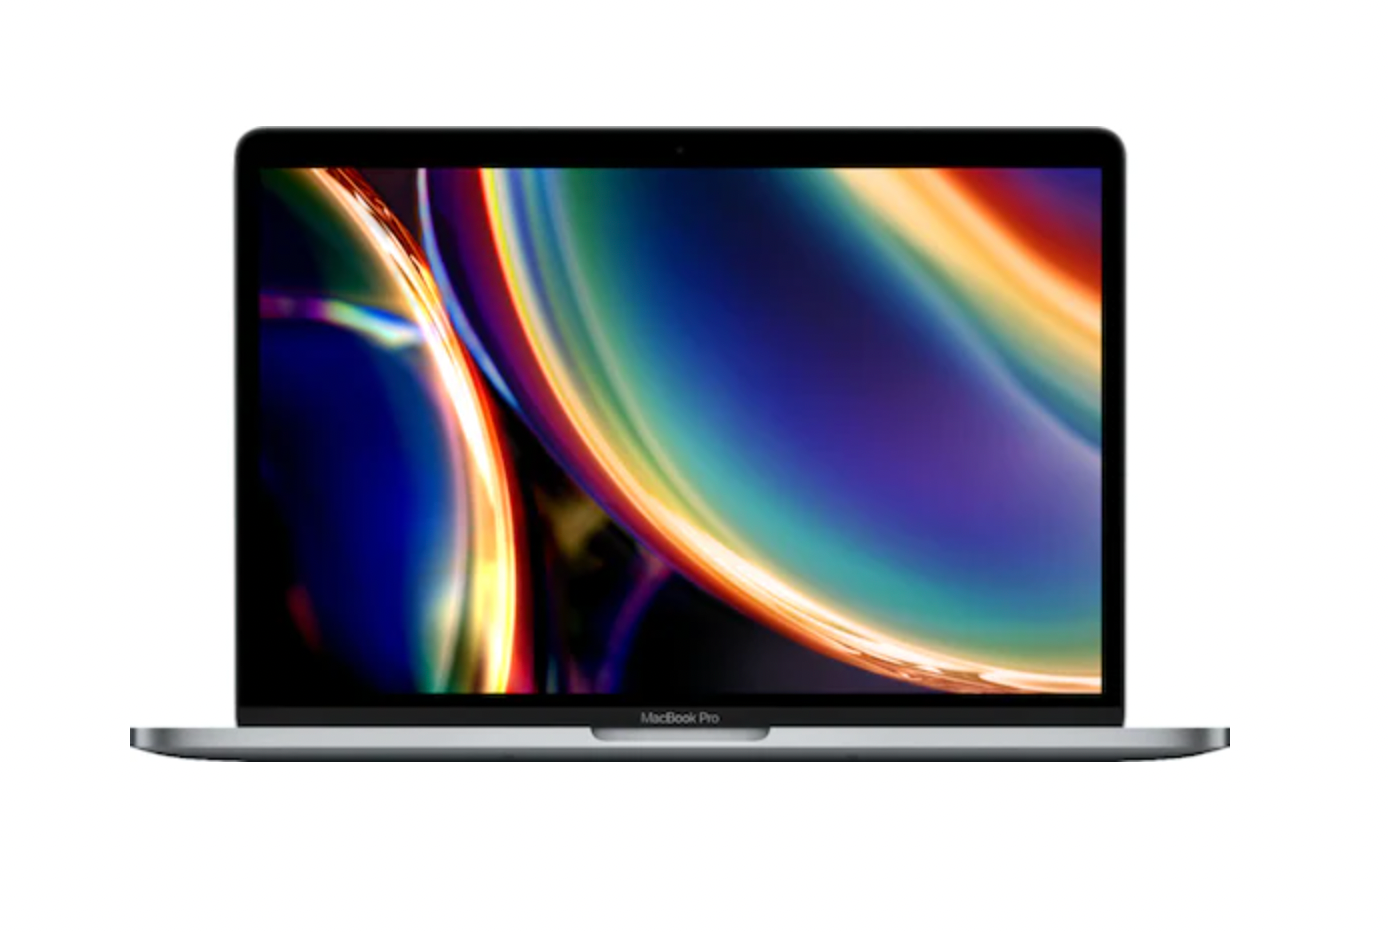 Apple MacBook Pro 13" Display with Touch Bar